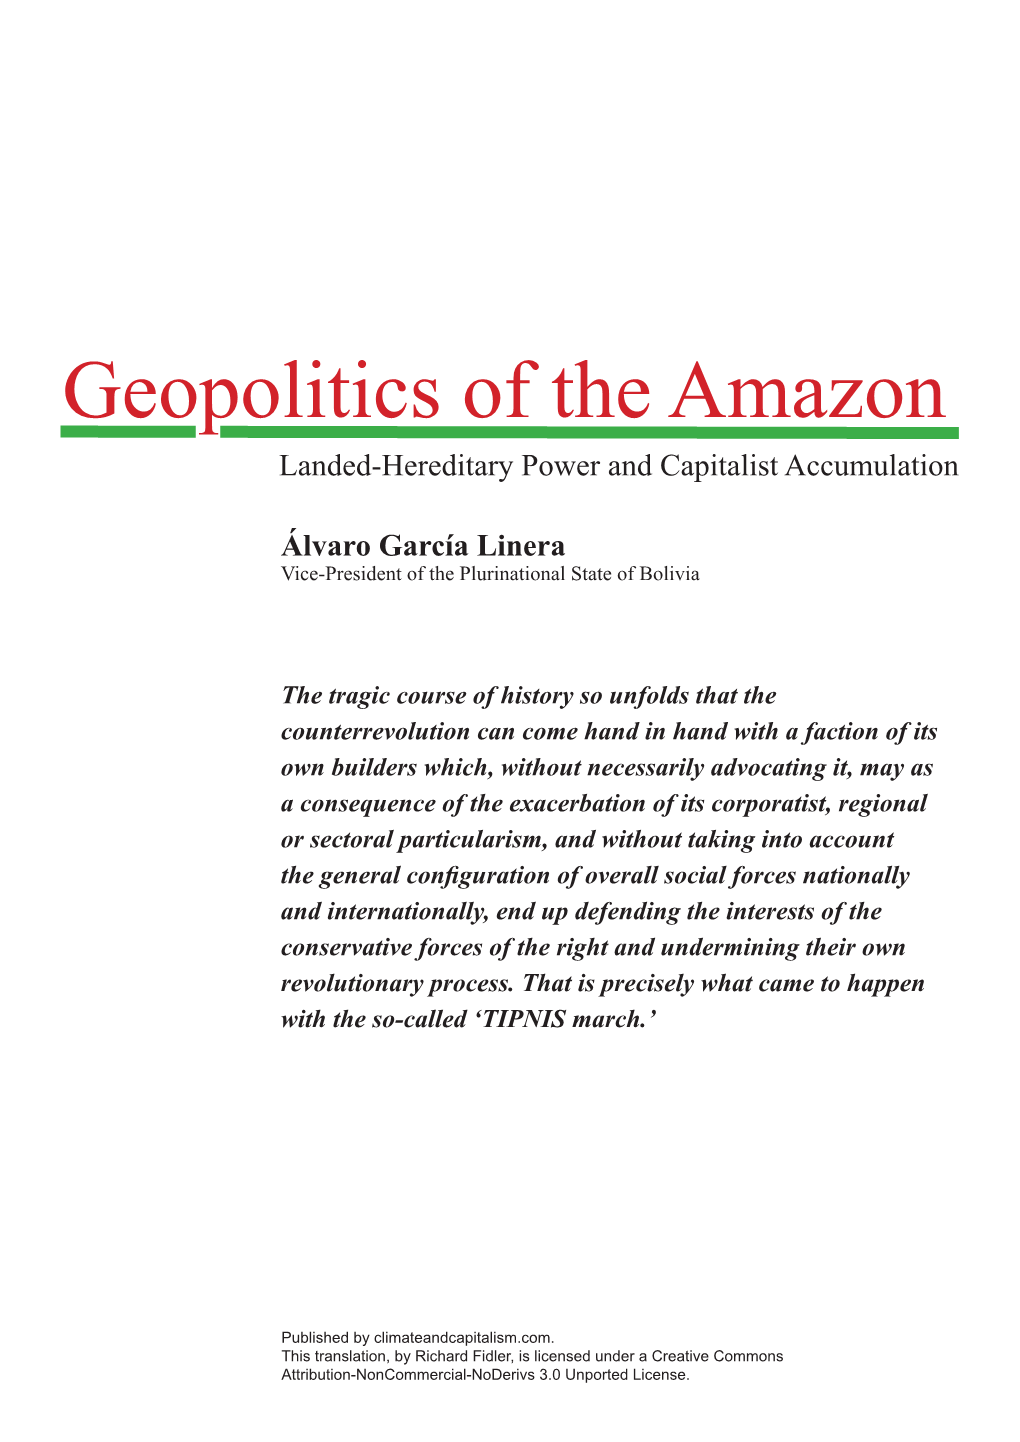 Geopolitics of the Amazon Landed-Hereditary Power and Capitalist Accumulation